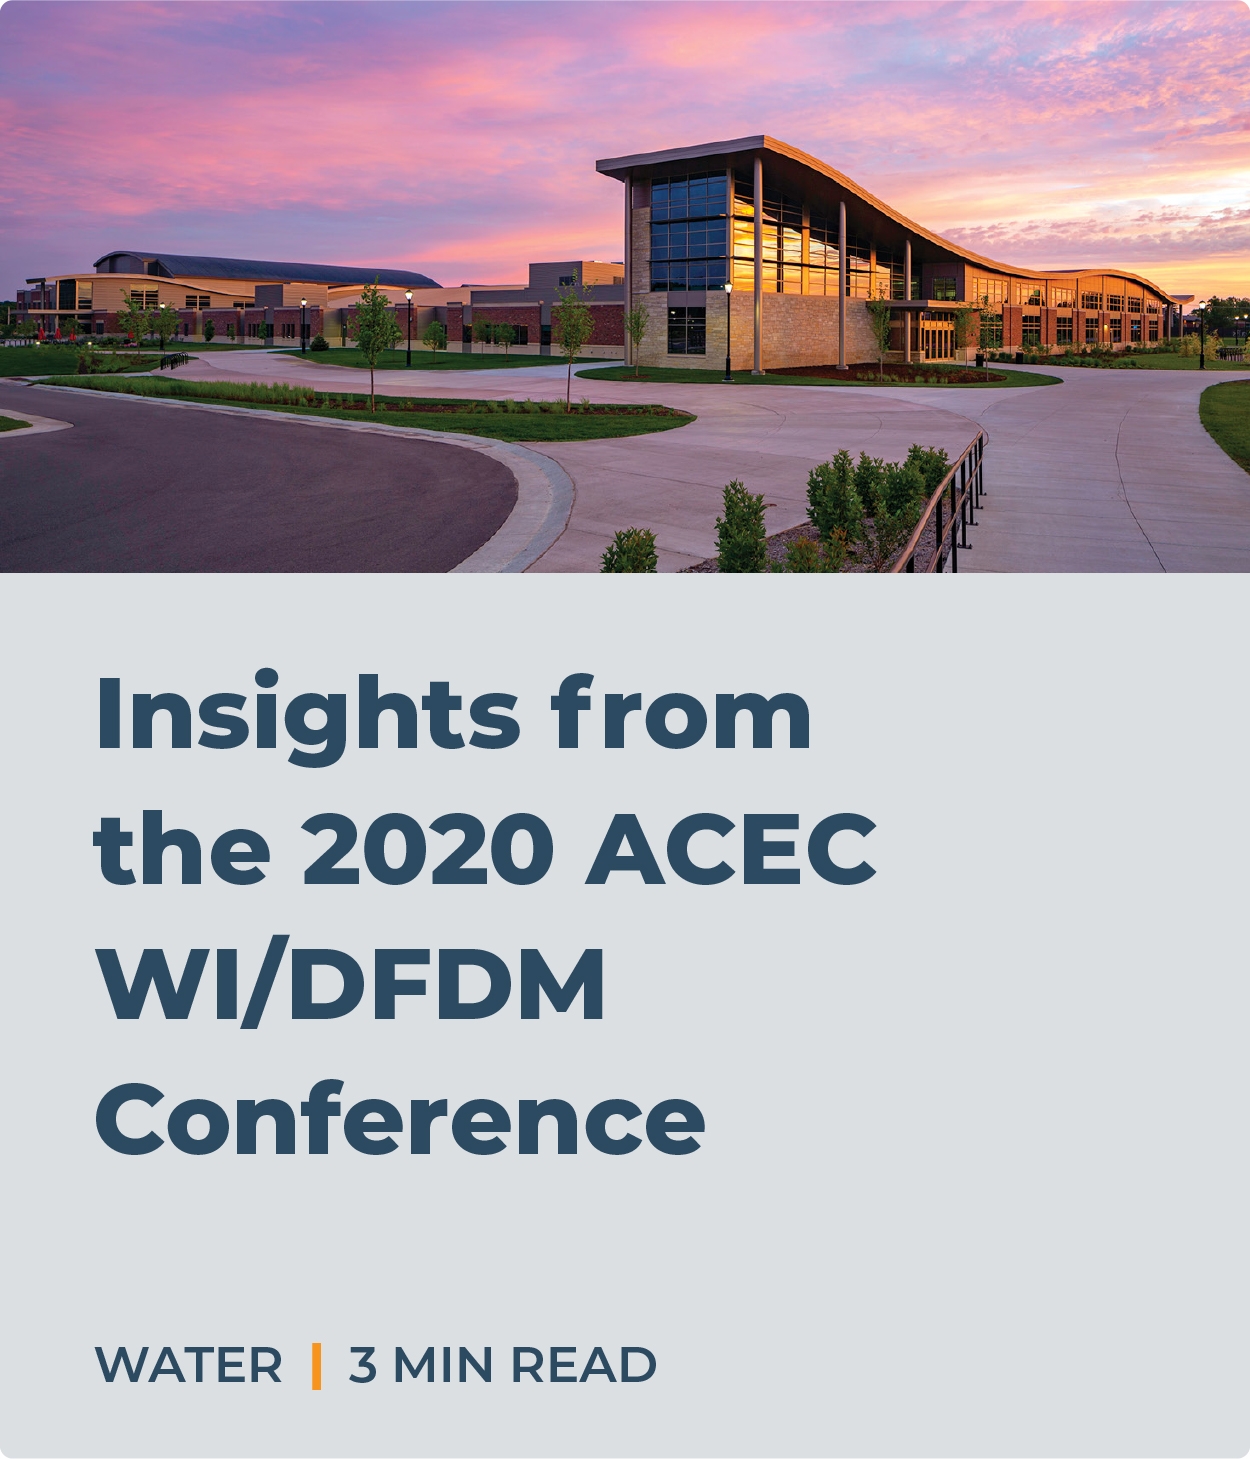 Insights from the 2020 ACEC WI DFDM Conference